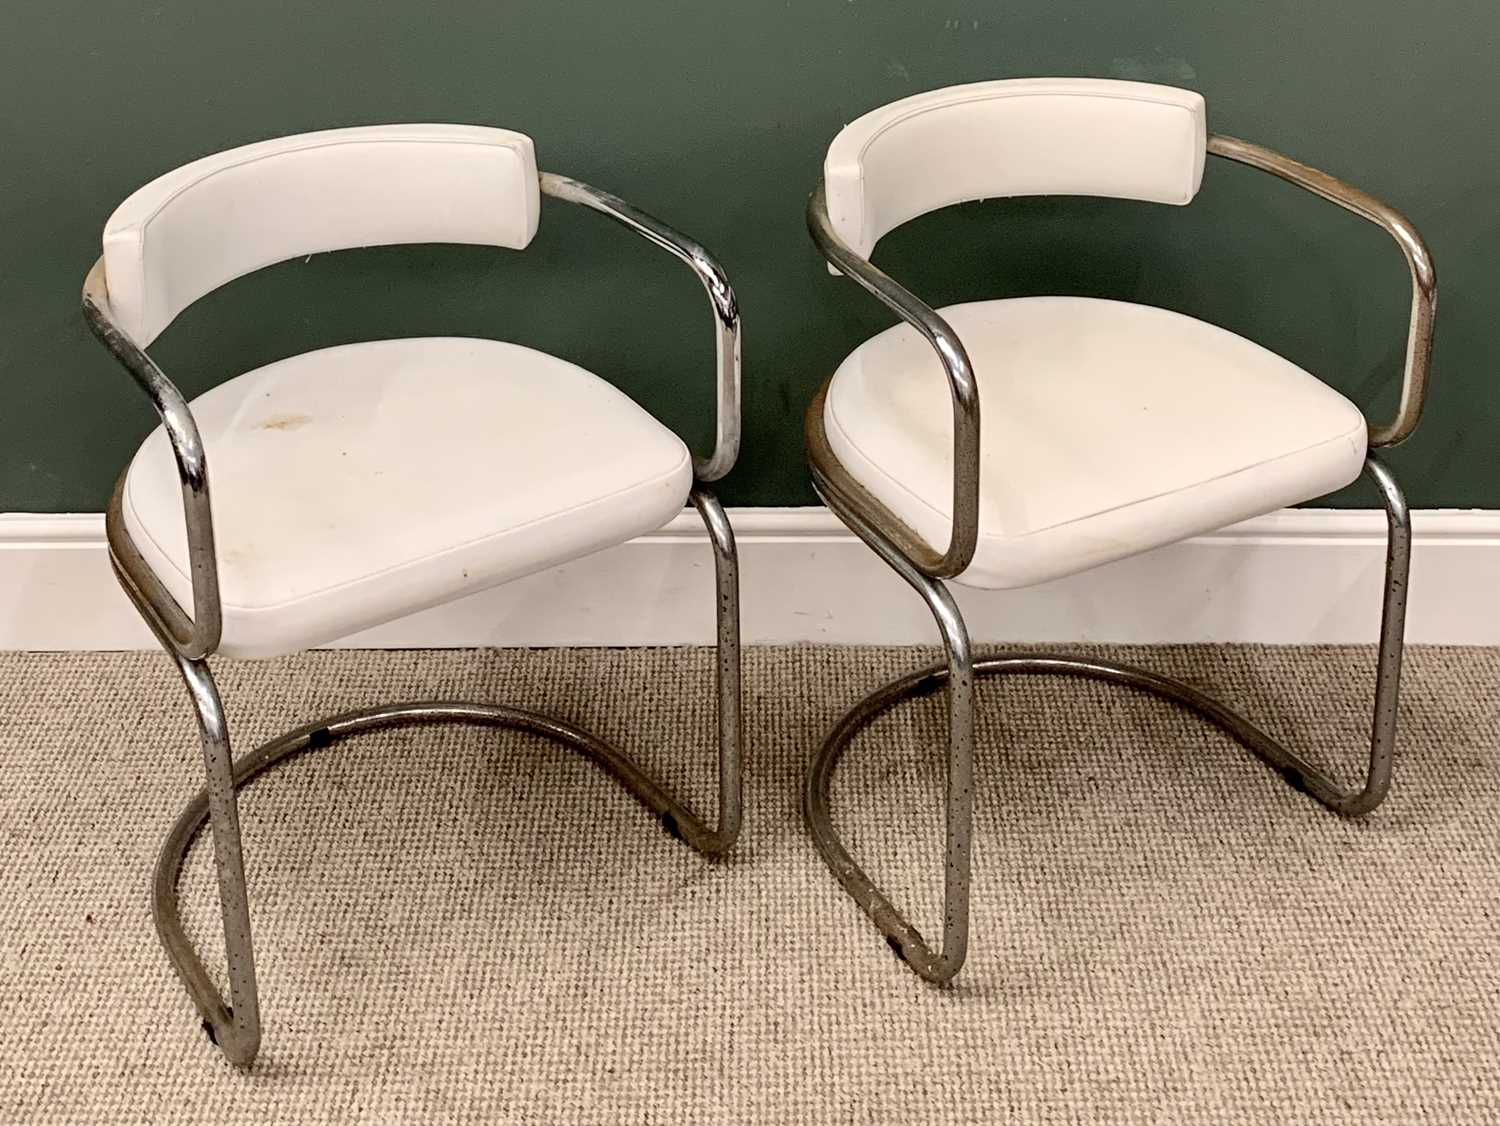 RETRO TUB TYPE DINING CHAIRS - set of four with vinyl seats and backs within chrome frames, 72cms H, - Image 2 of 3